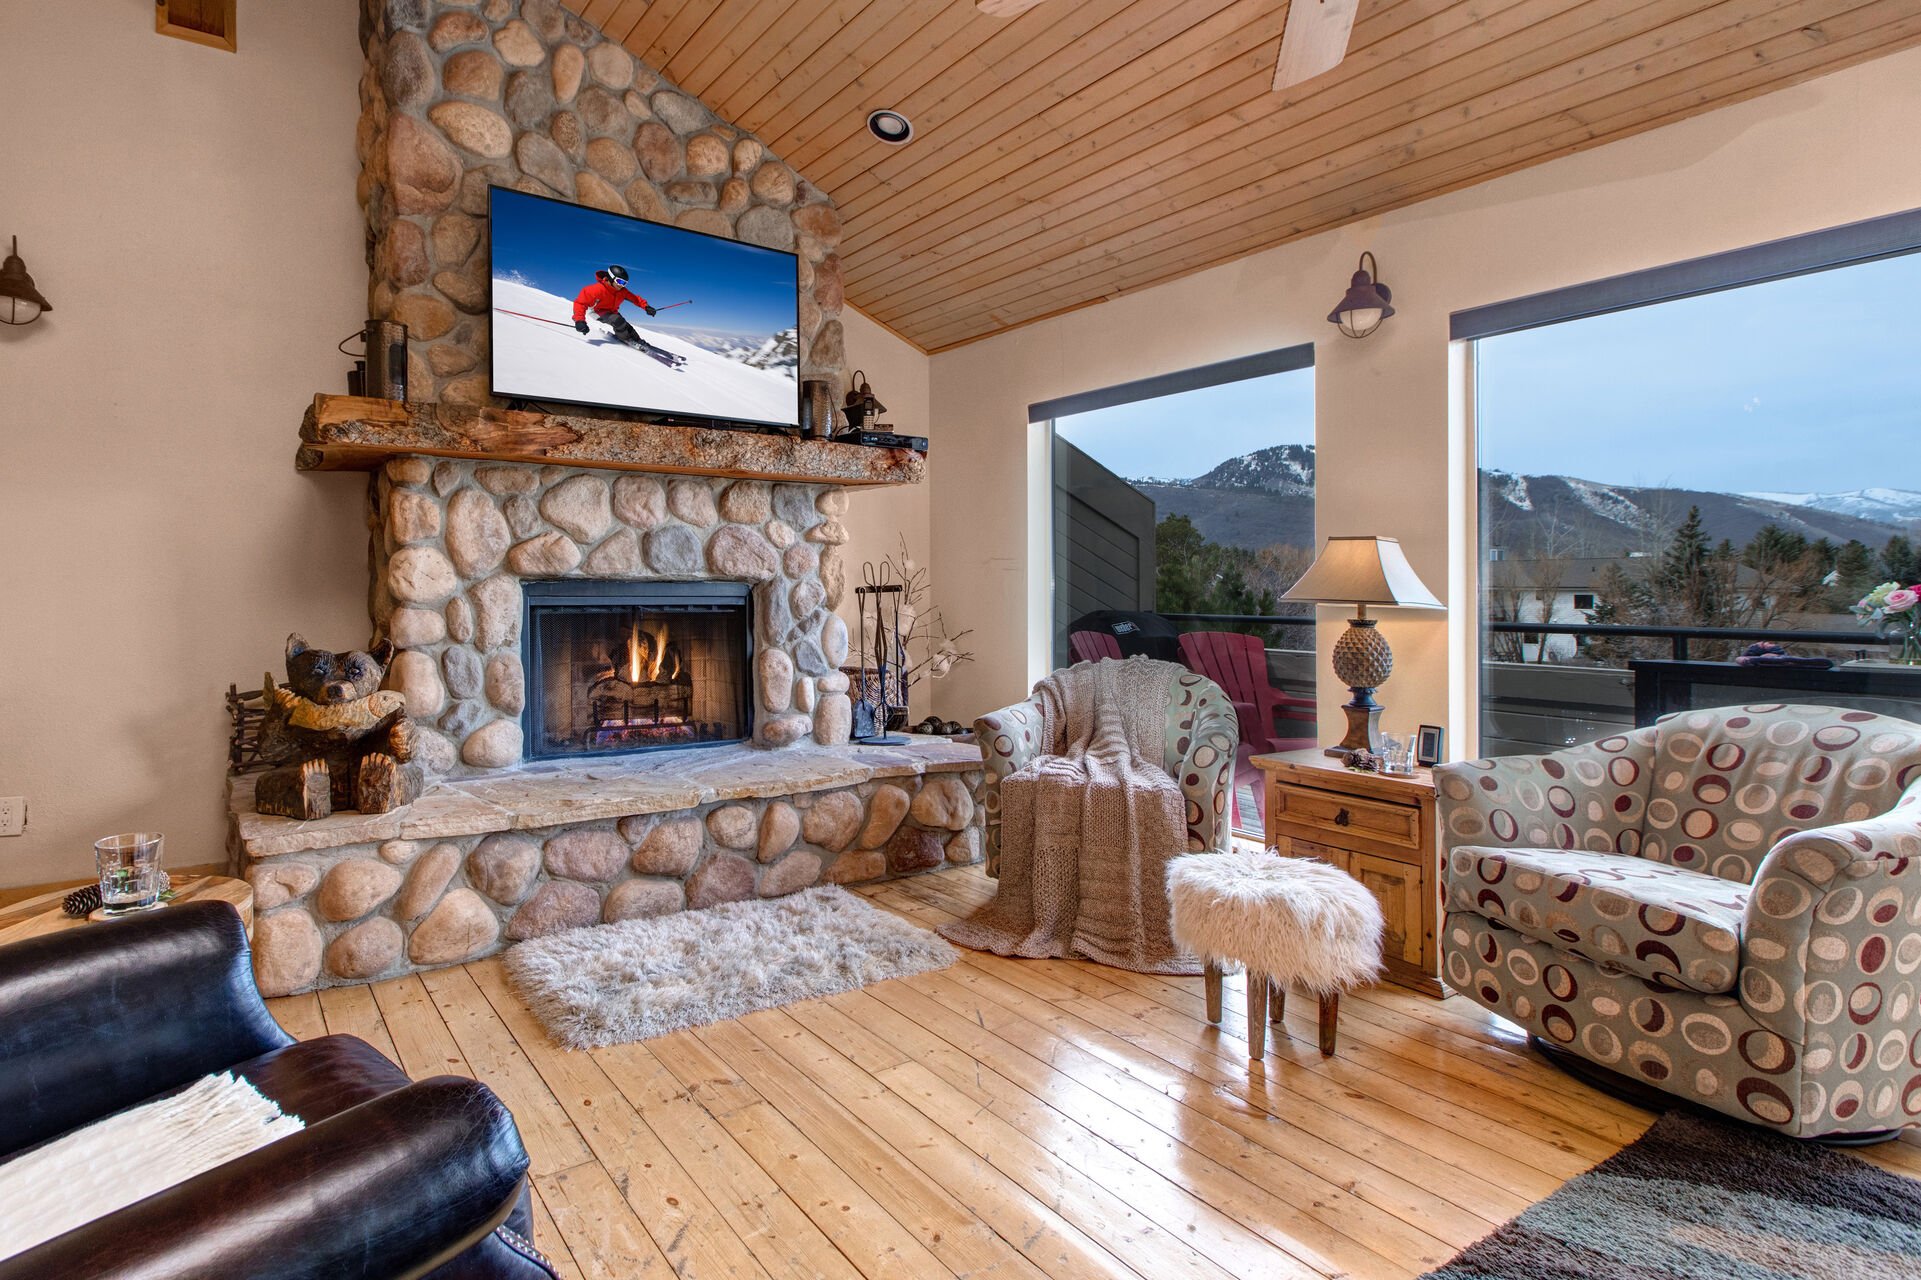 Main Living Room with a wood-burning fireplace, smart tv, and fabulous mountain views